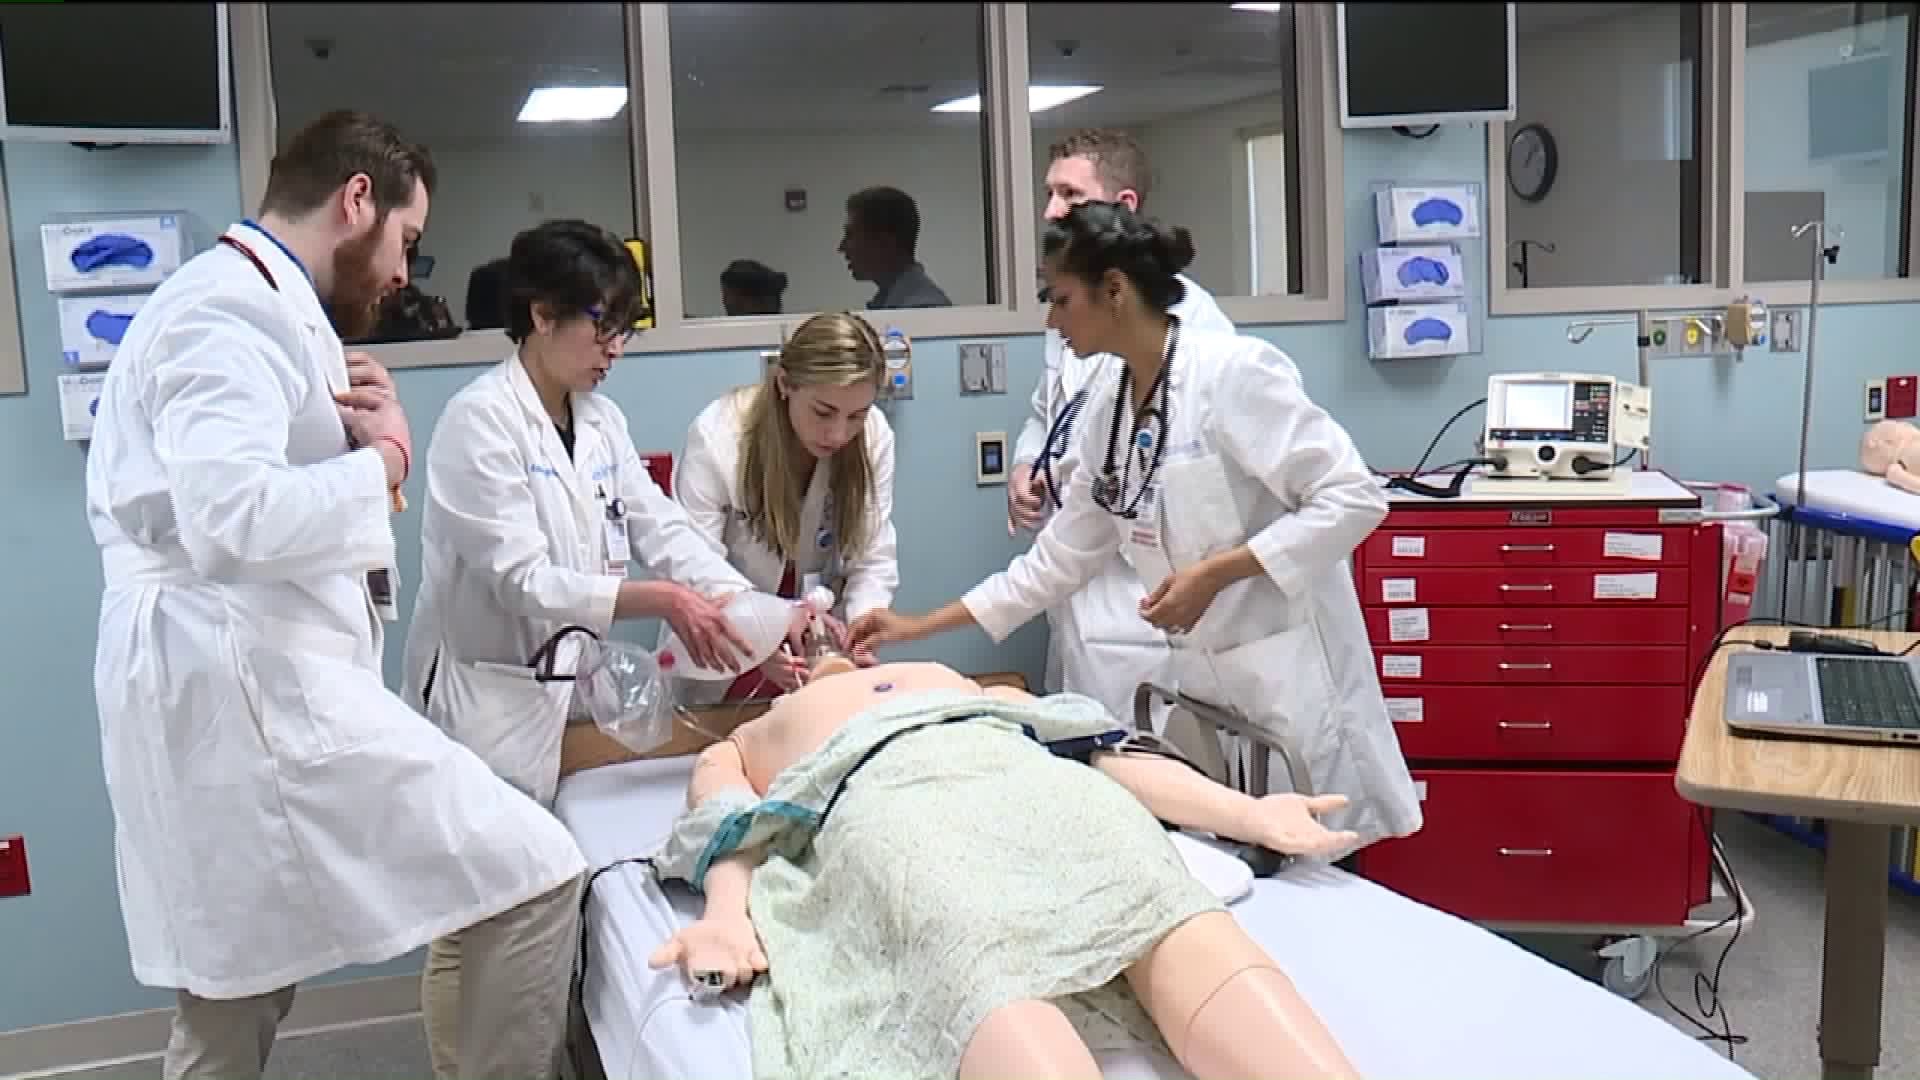 Healthwatch 16: Training Doctors with High-tech Simulation